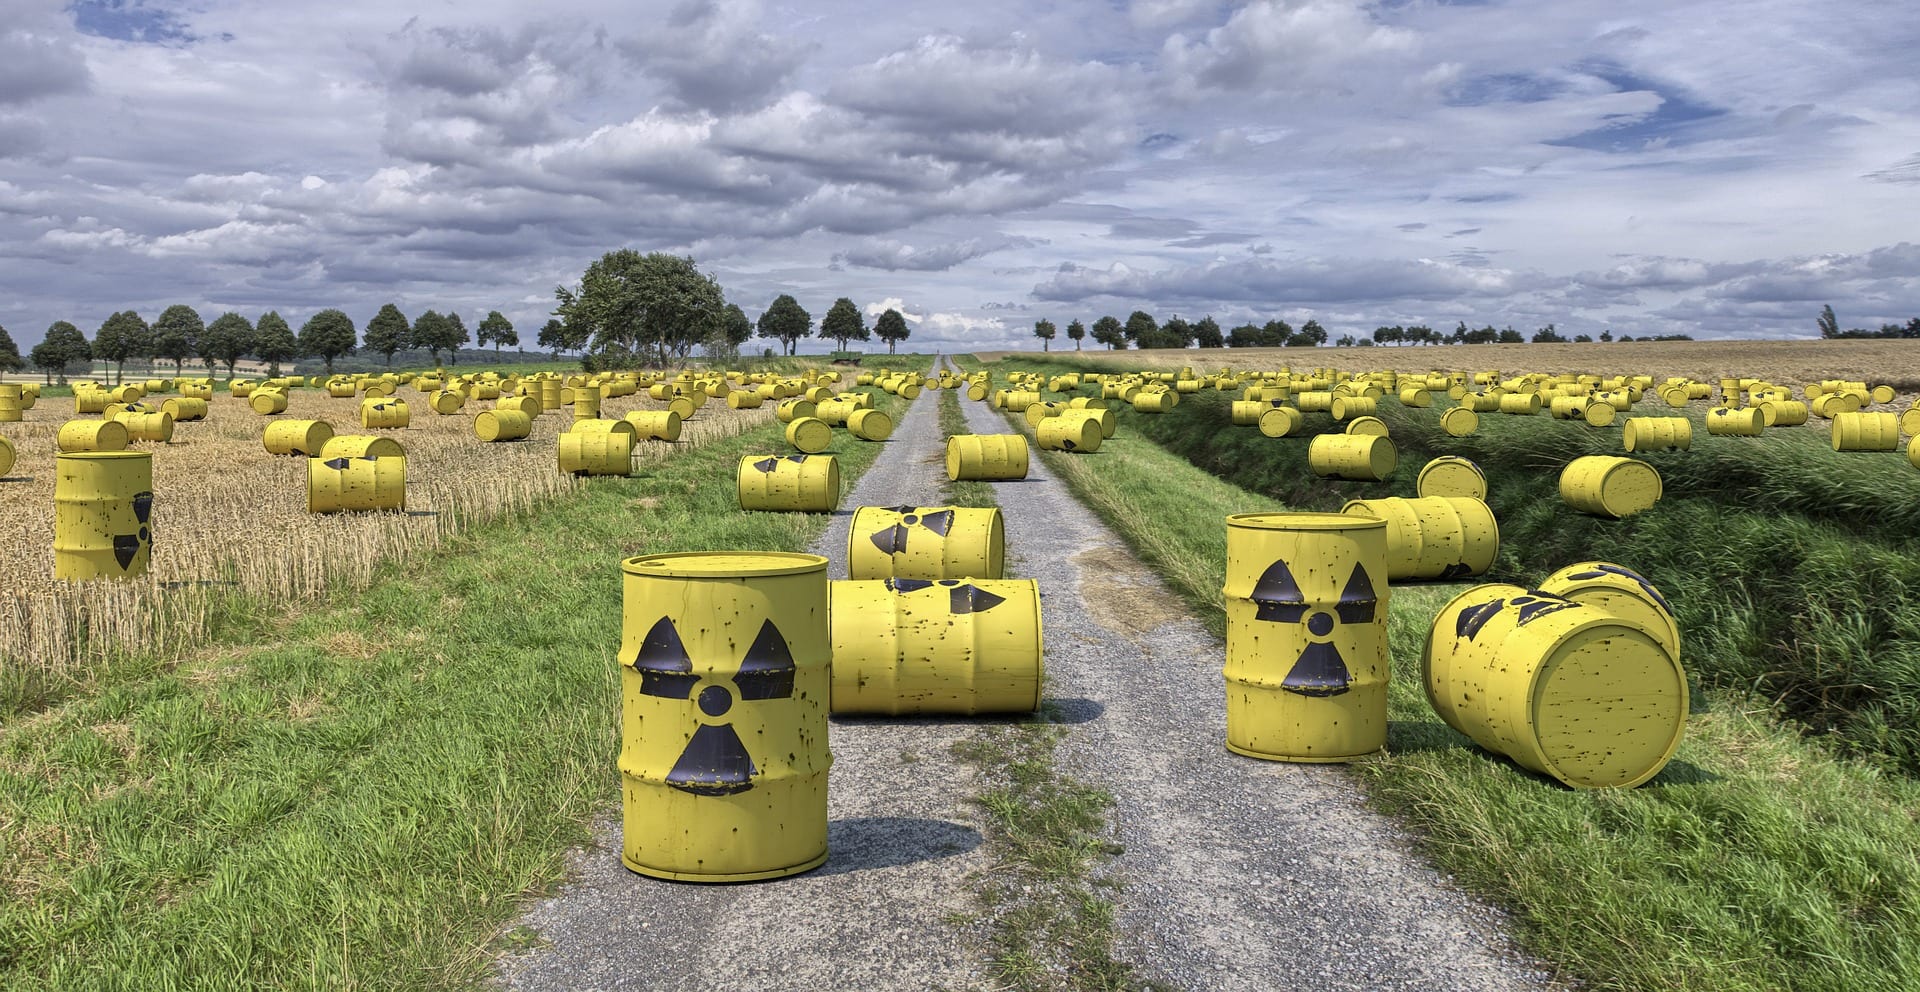 Nuclear waste pollution